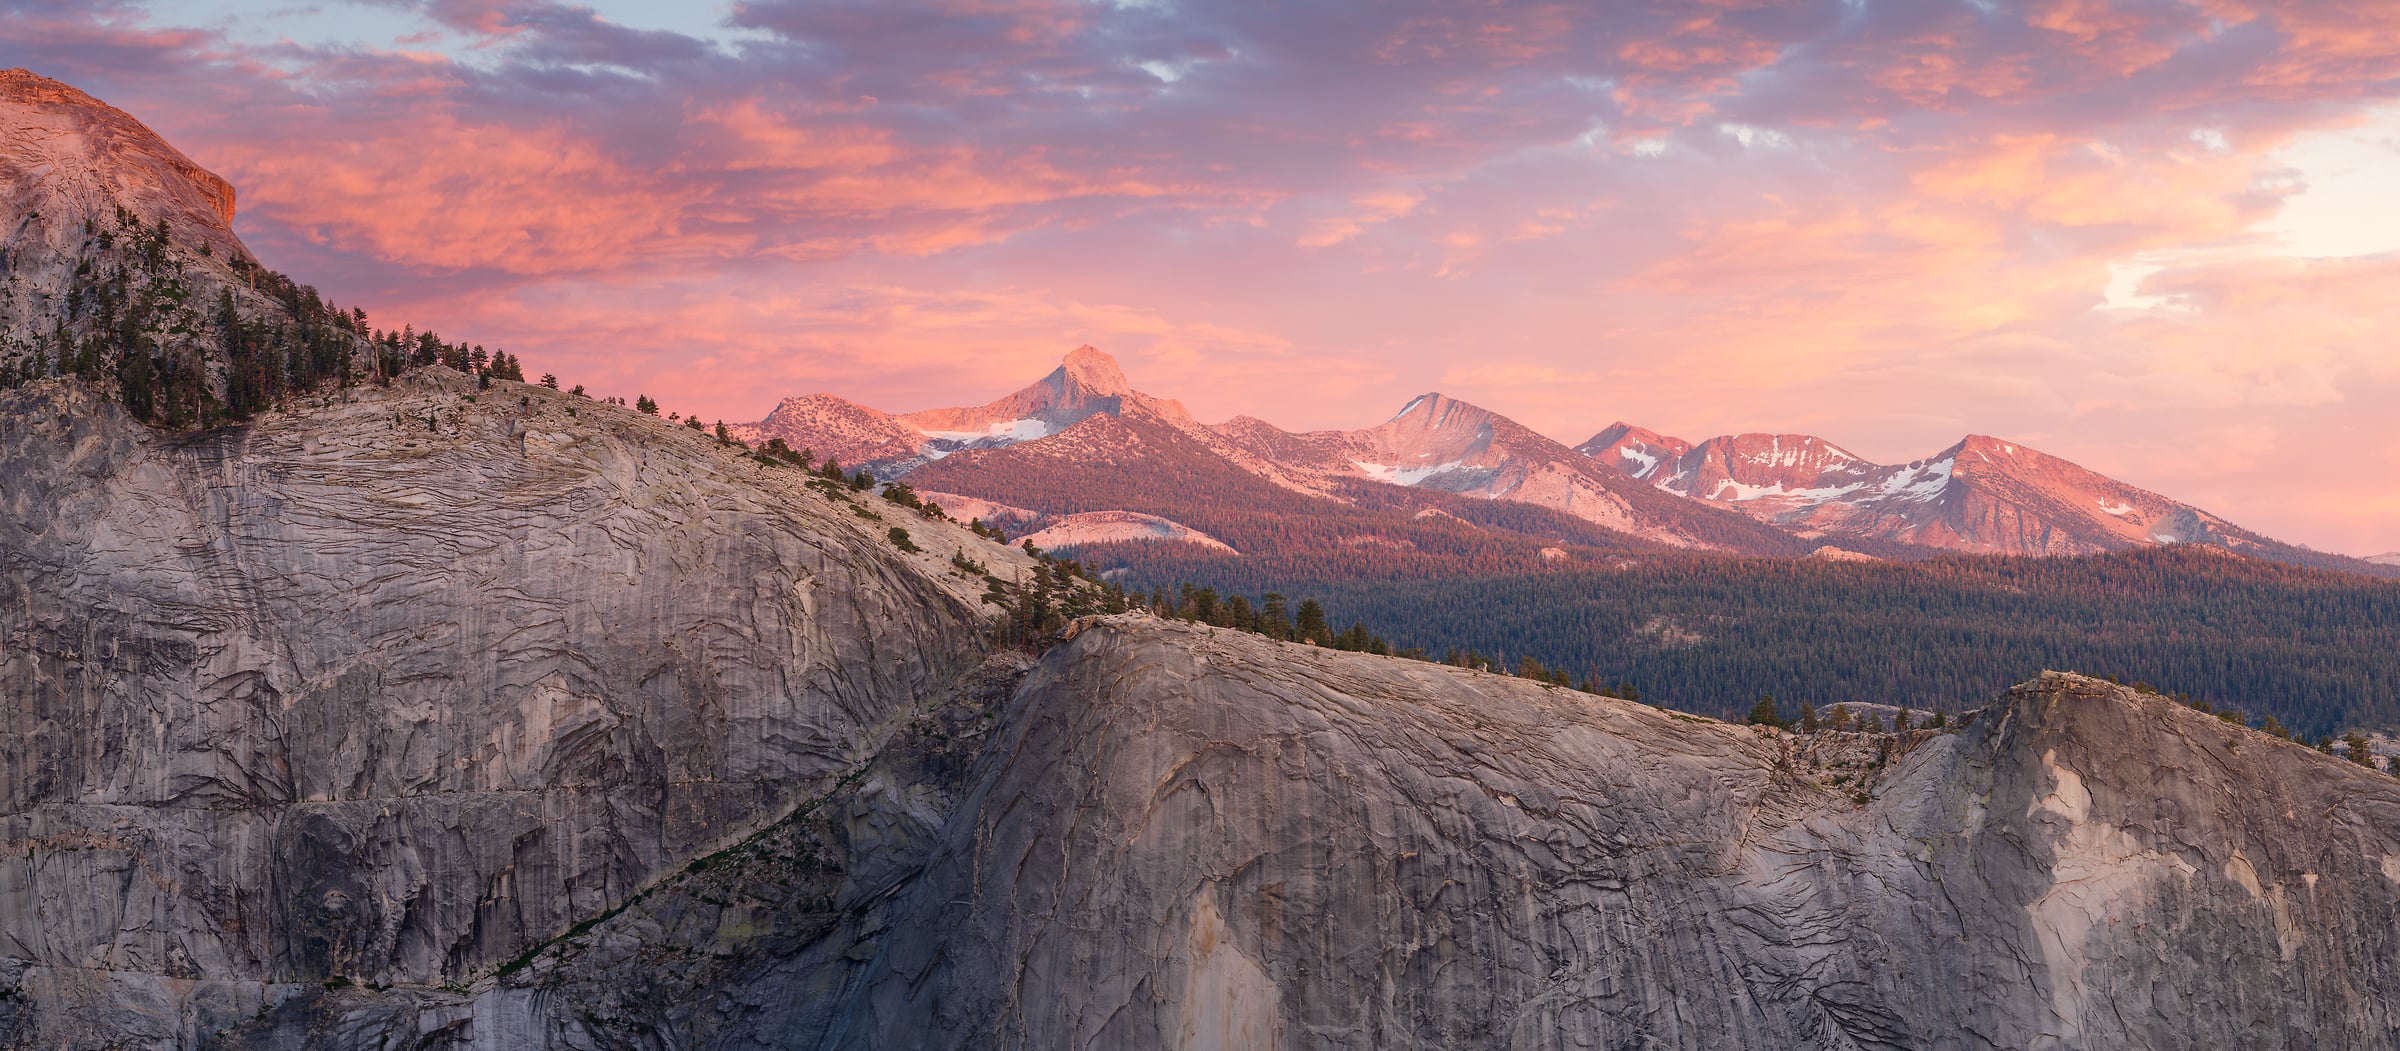 197 megapixels! A very high resolution, large-format VAST photo print of The Clark Range of mountains at sunset in Yosemite National Park; landscape photograph created by Jeff Lewis in California.